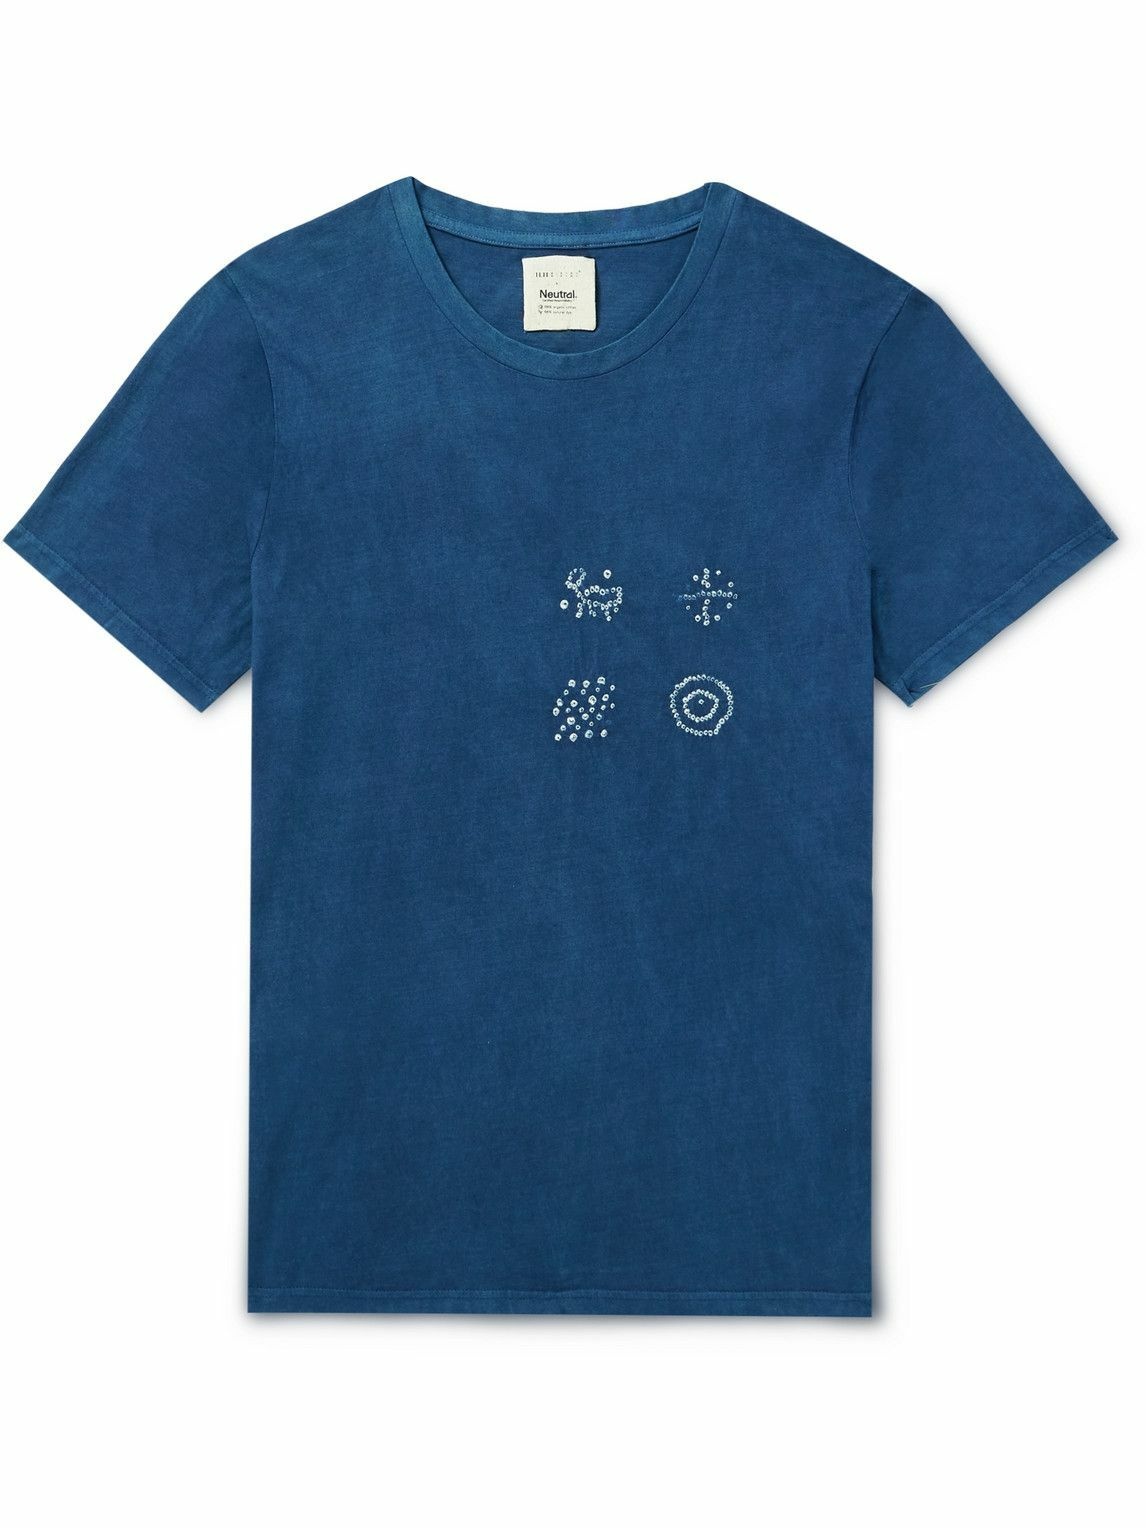 Photo: 11.11/eleven eleven - Embroidered Tie-Dyed Cotton-Jersey T-Shirt - Blue